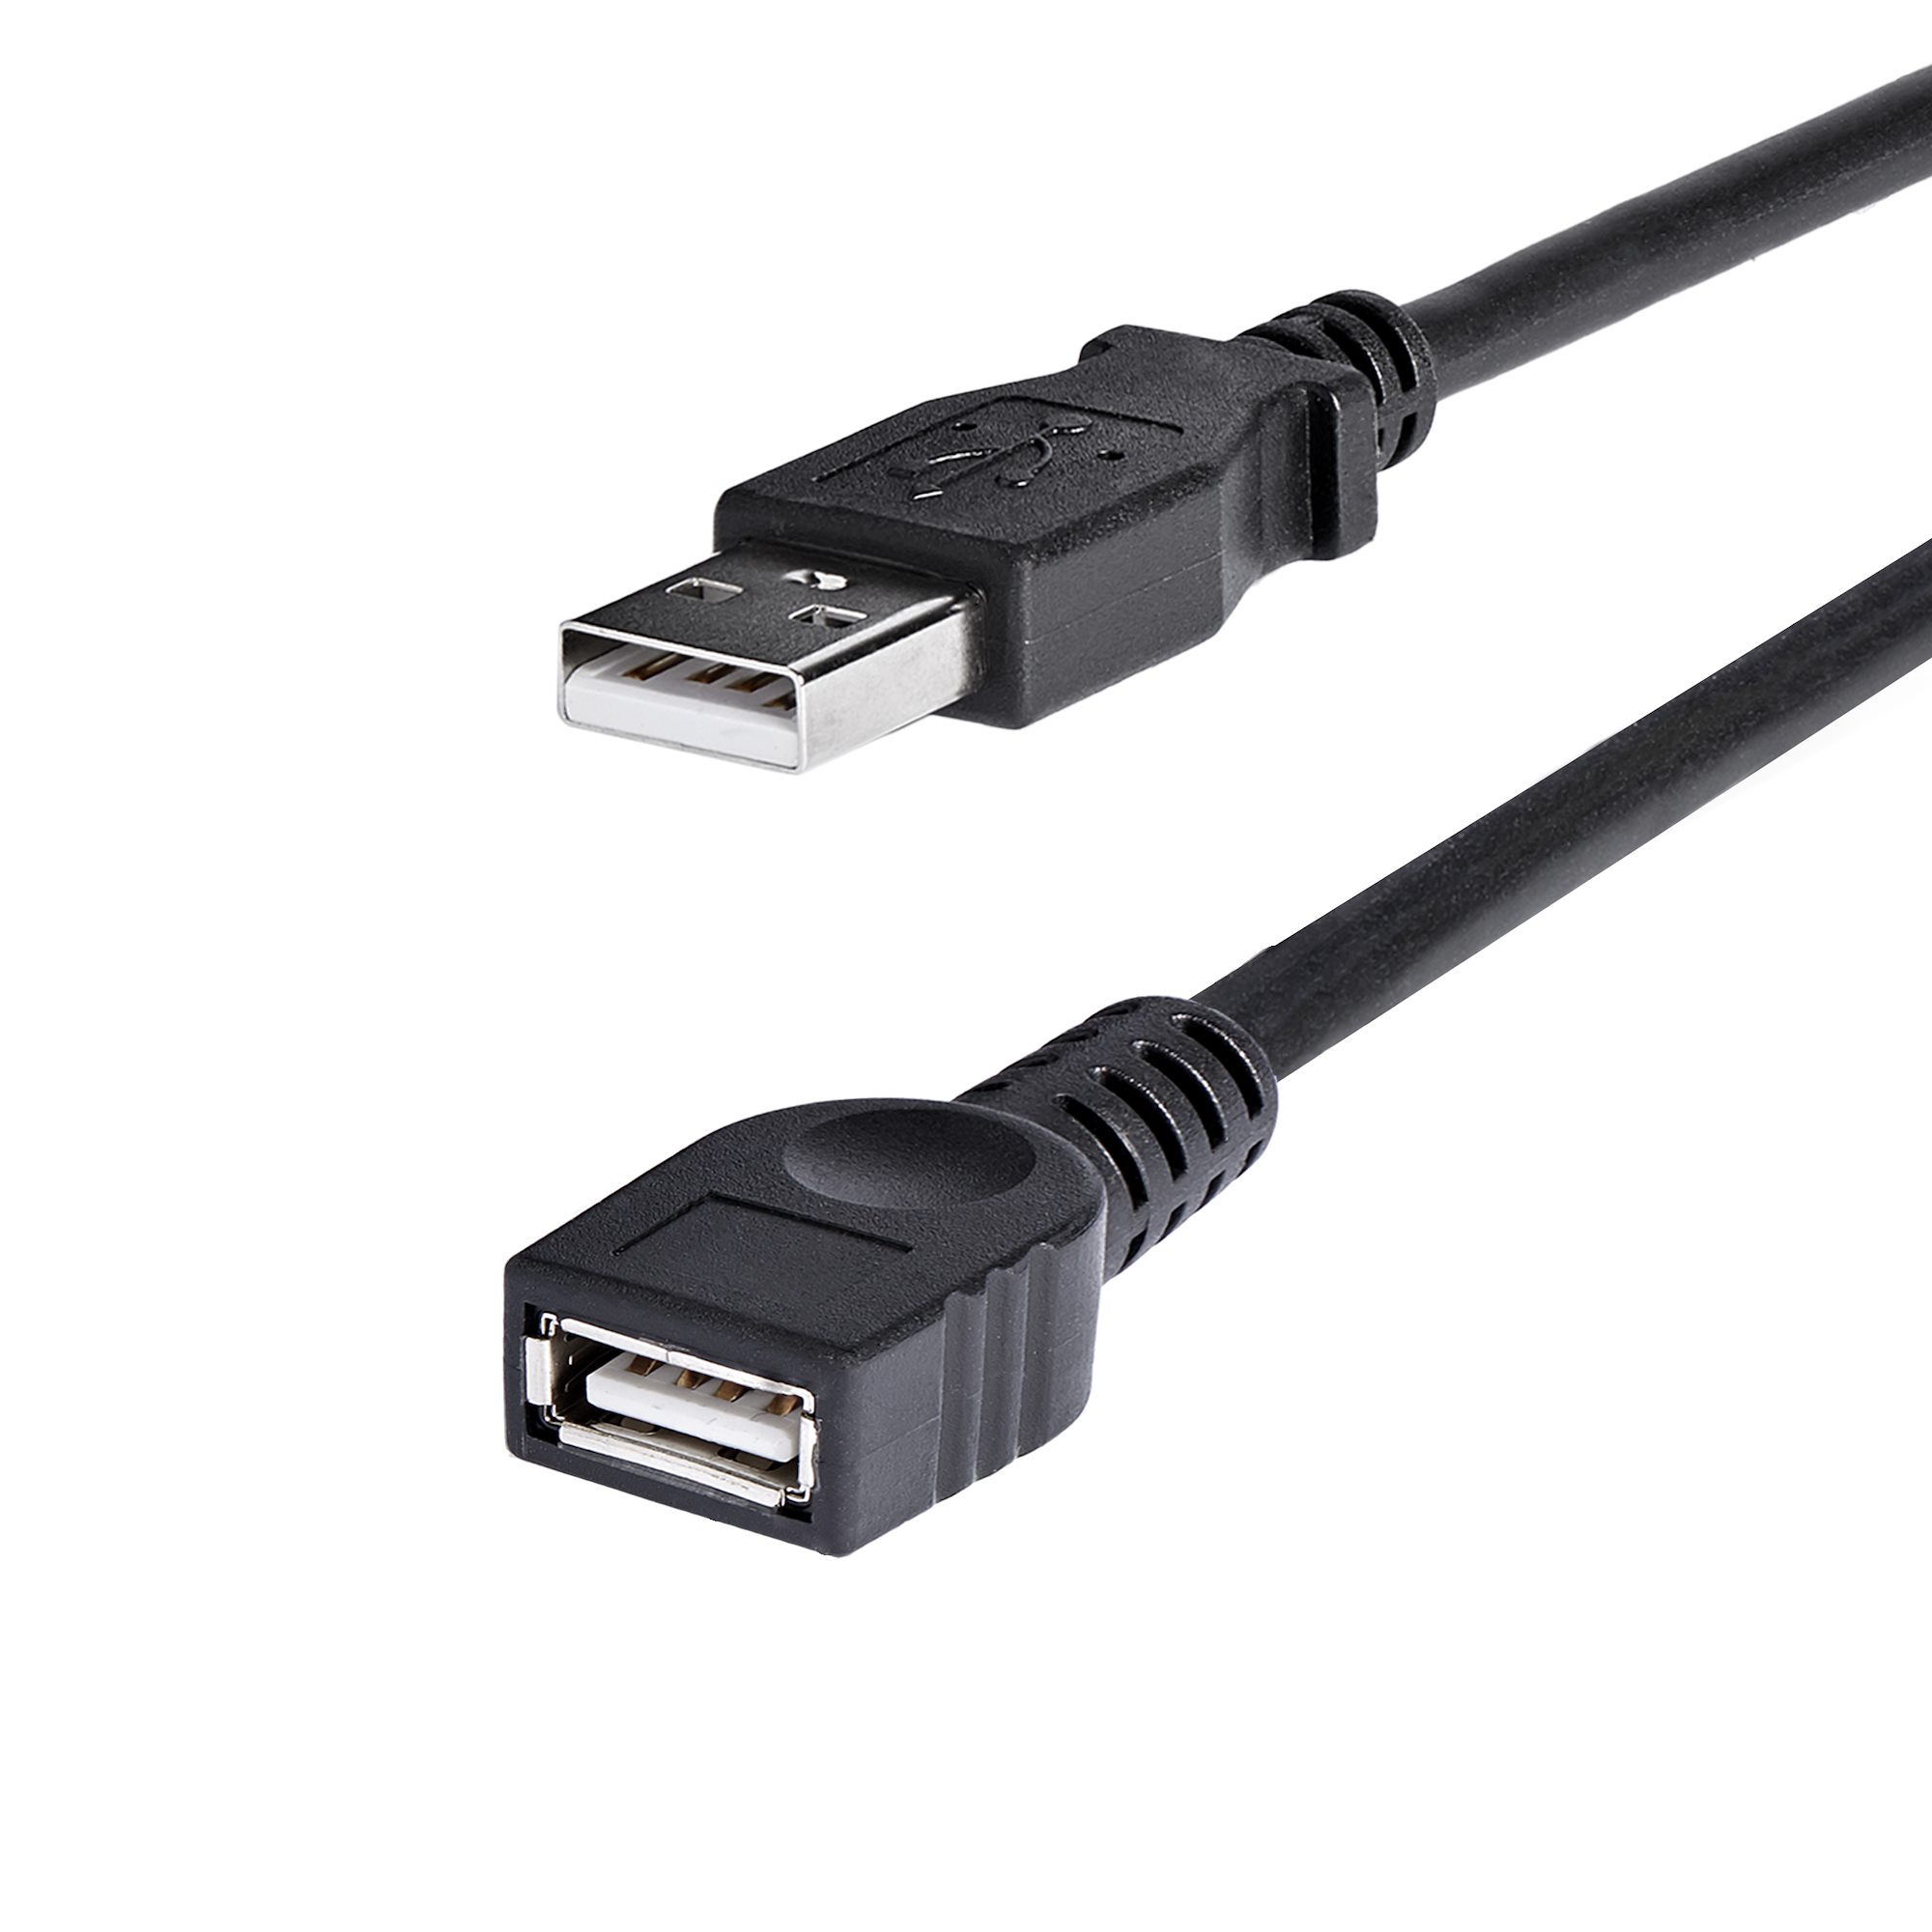 2 Pack USB 2.0  Type A Male to Type A Male Extension HighSpeed Cable,6 ft,6 feet 